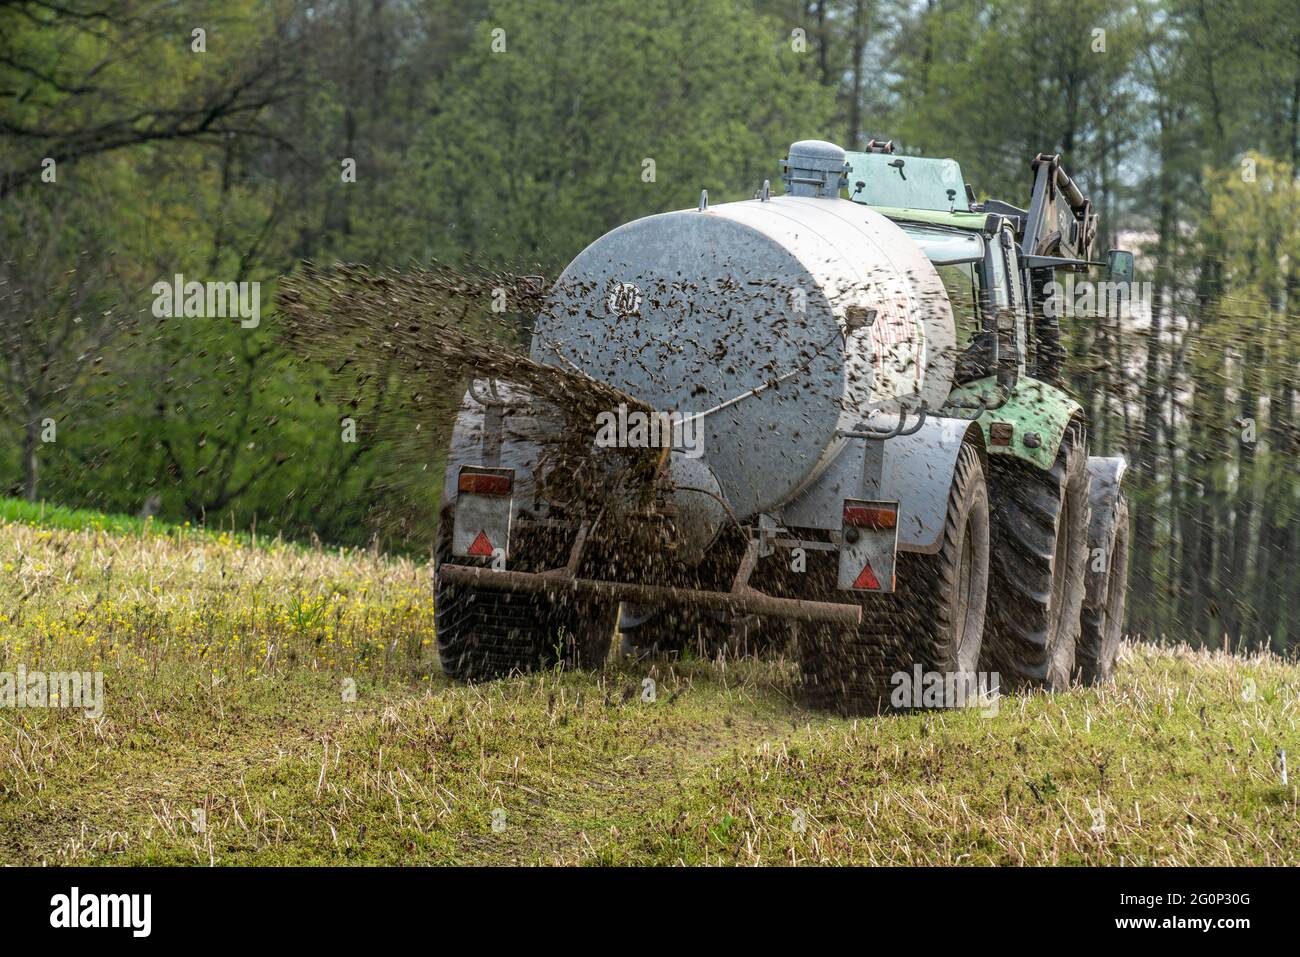 liquid manure is spread on a field with a tractor from a liquid manure barrel to fertilise the farmland nrw germany 2G0P30G